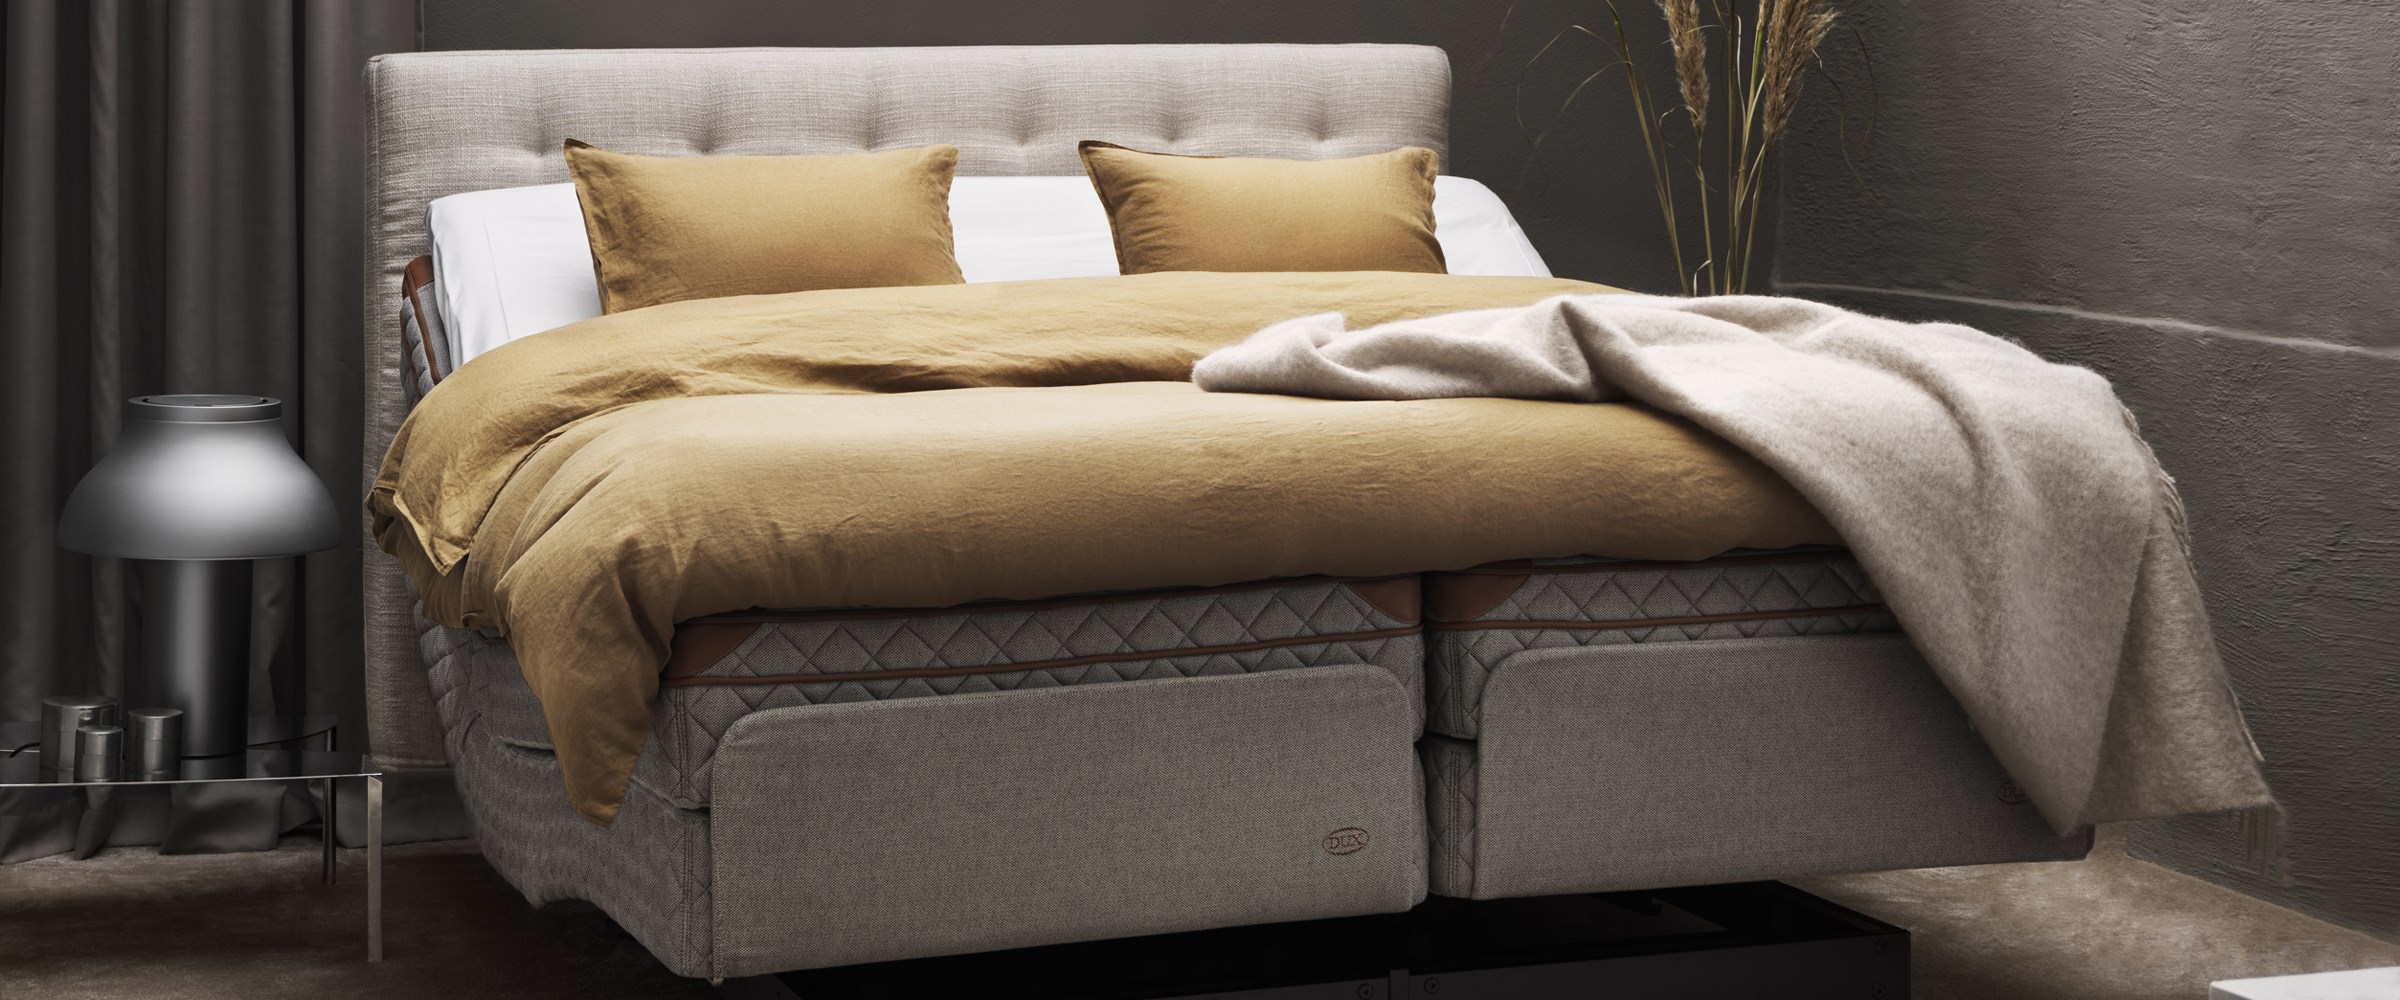 The DUX Dynamic - World's most luxurious adjustable bed